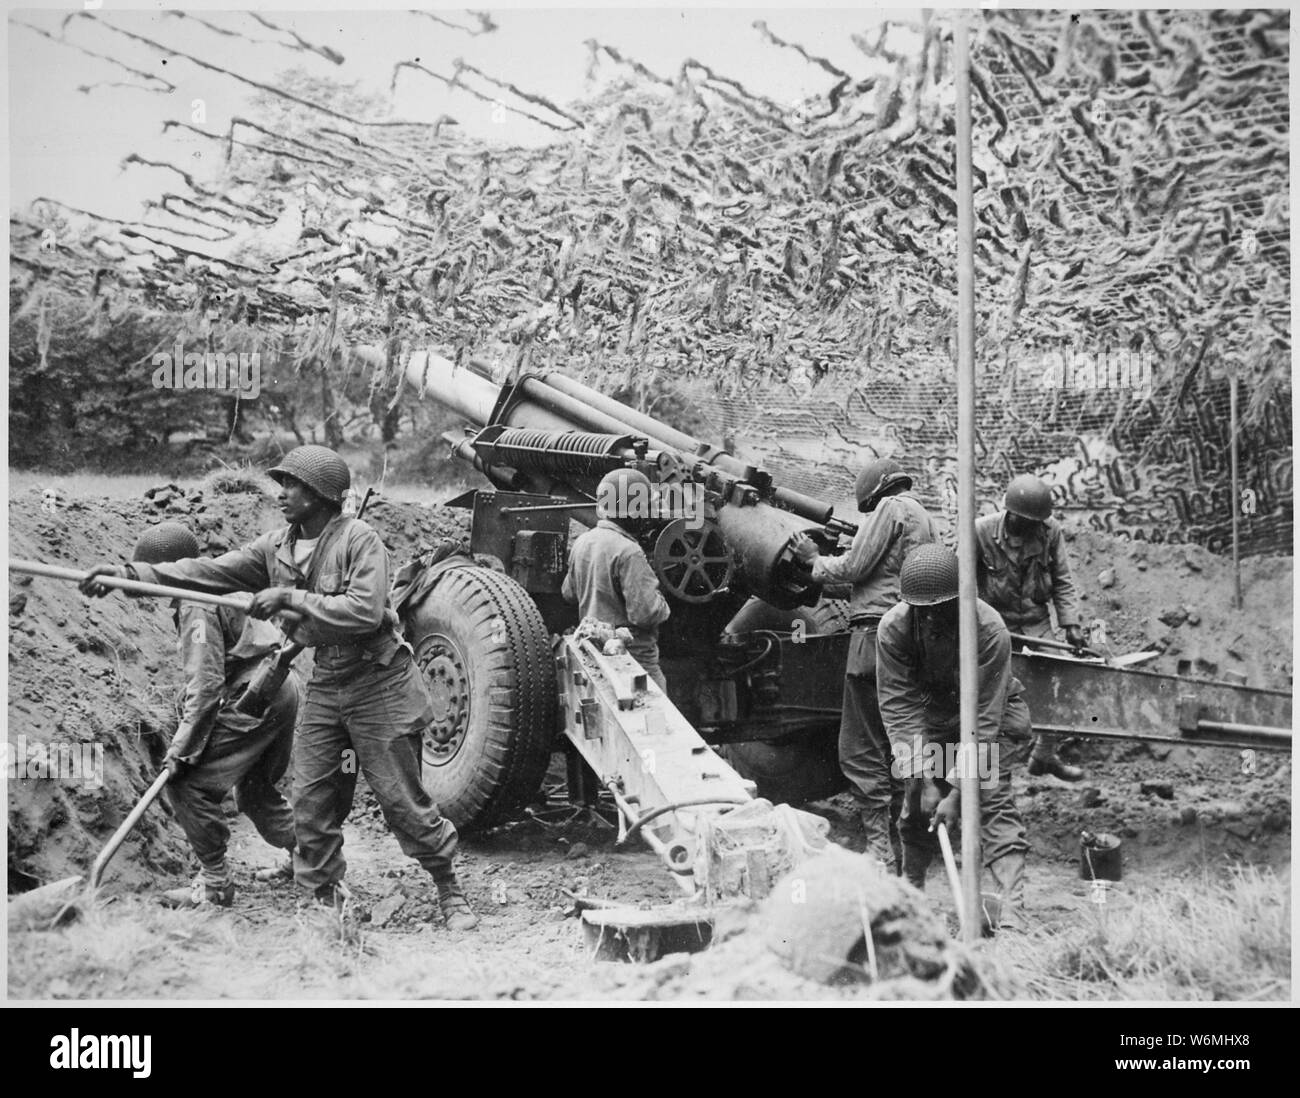 155mm howitzer Black and White Stock Photos & Images - Alamy